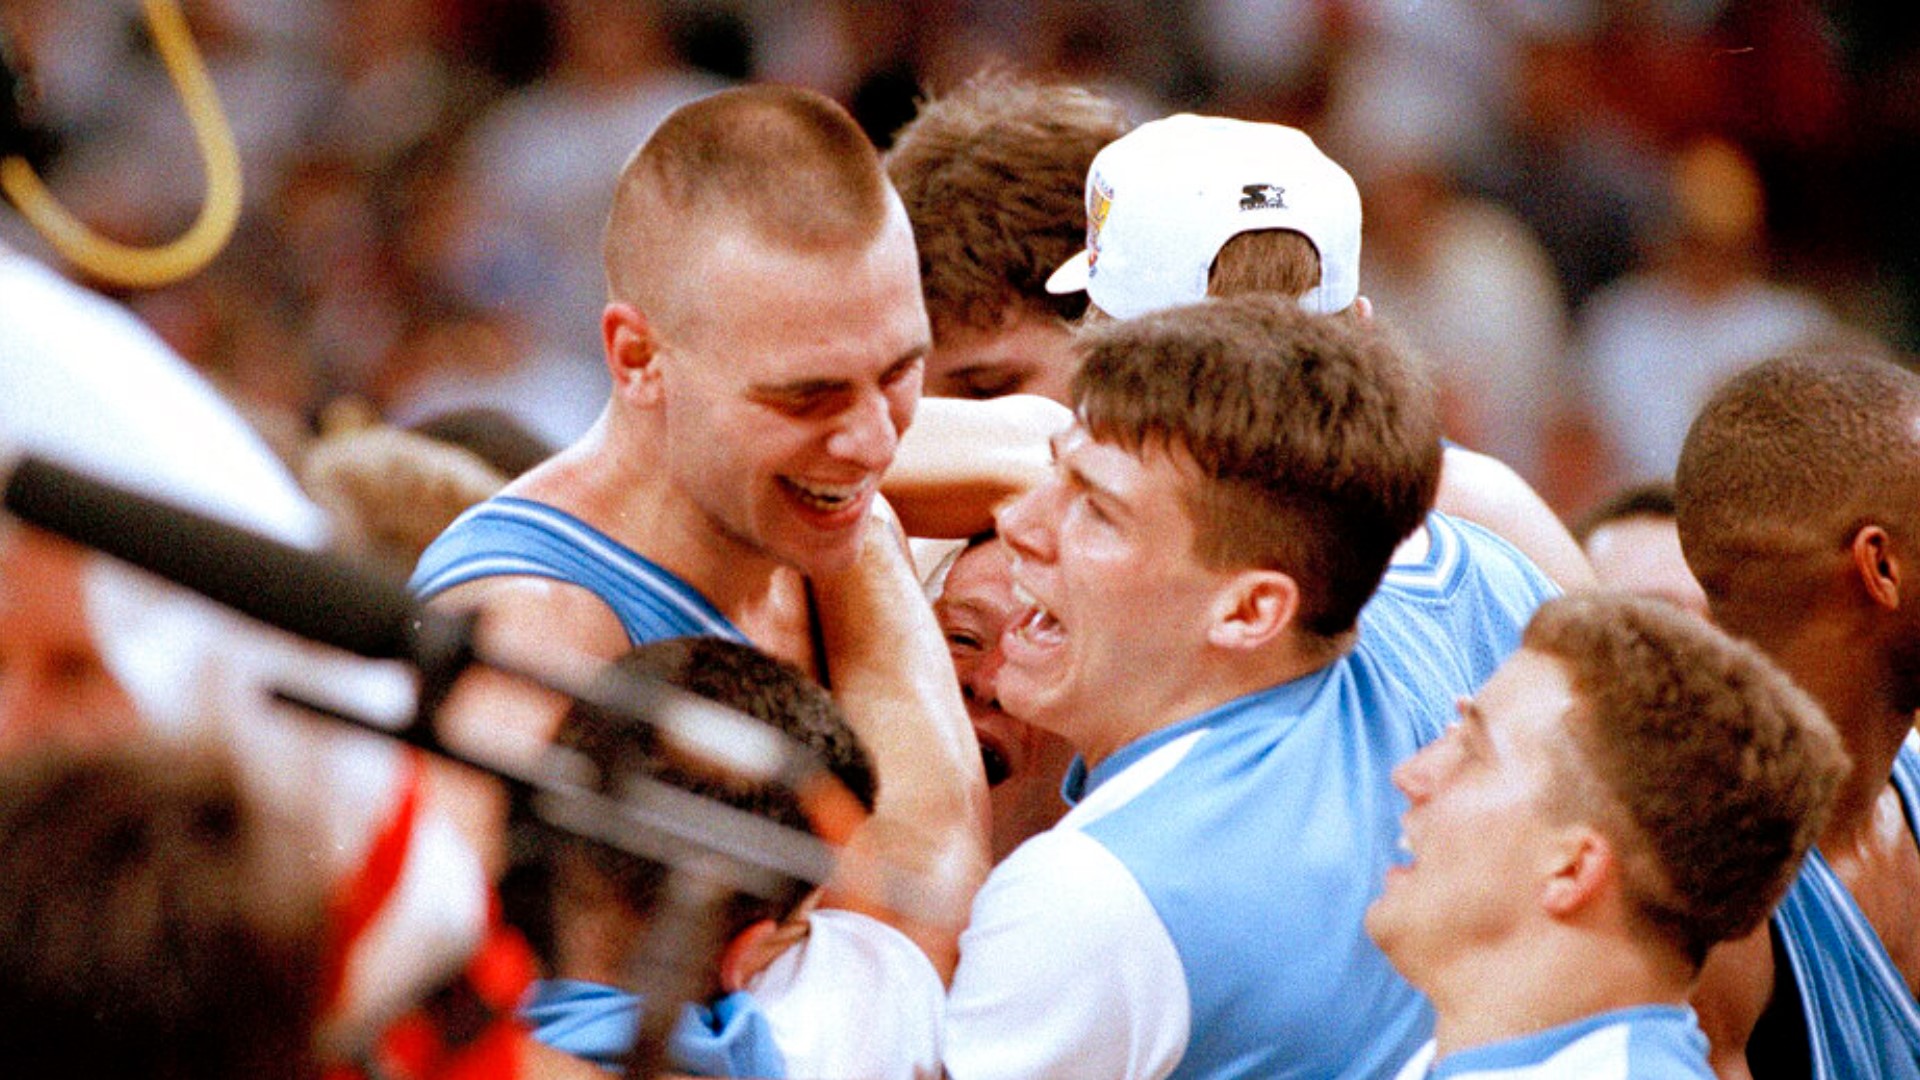 The 7-footer played for Carolina from 1990-1994 under Hall of Fame coach Dean Smith. He started at center for the 1993 National Championship team.